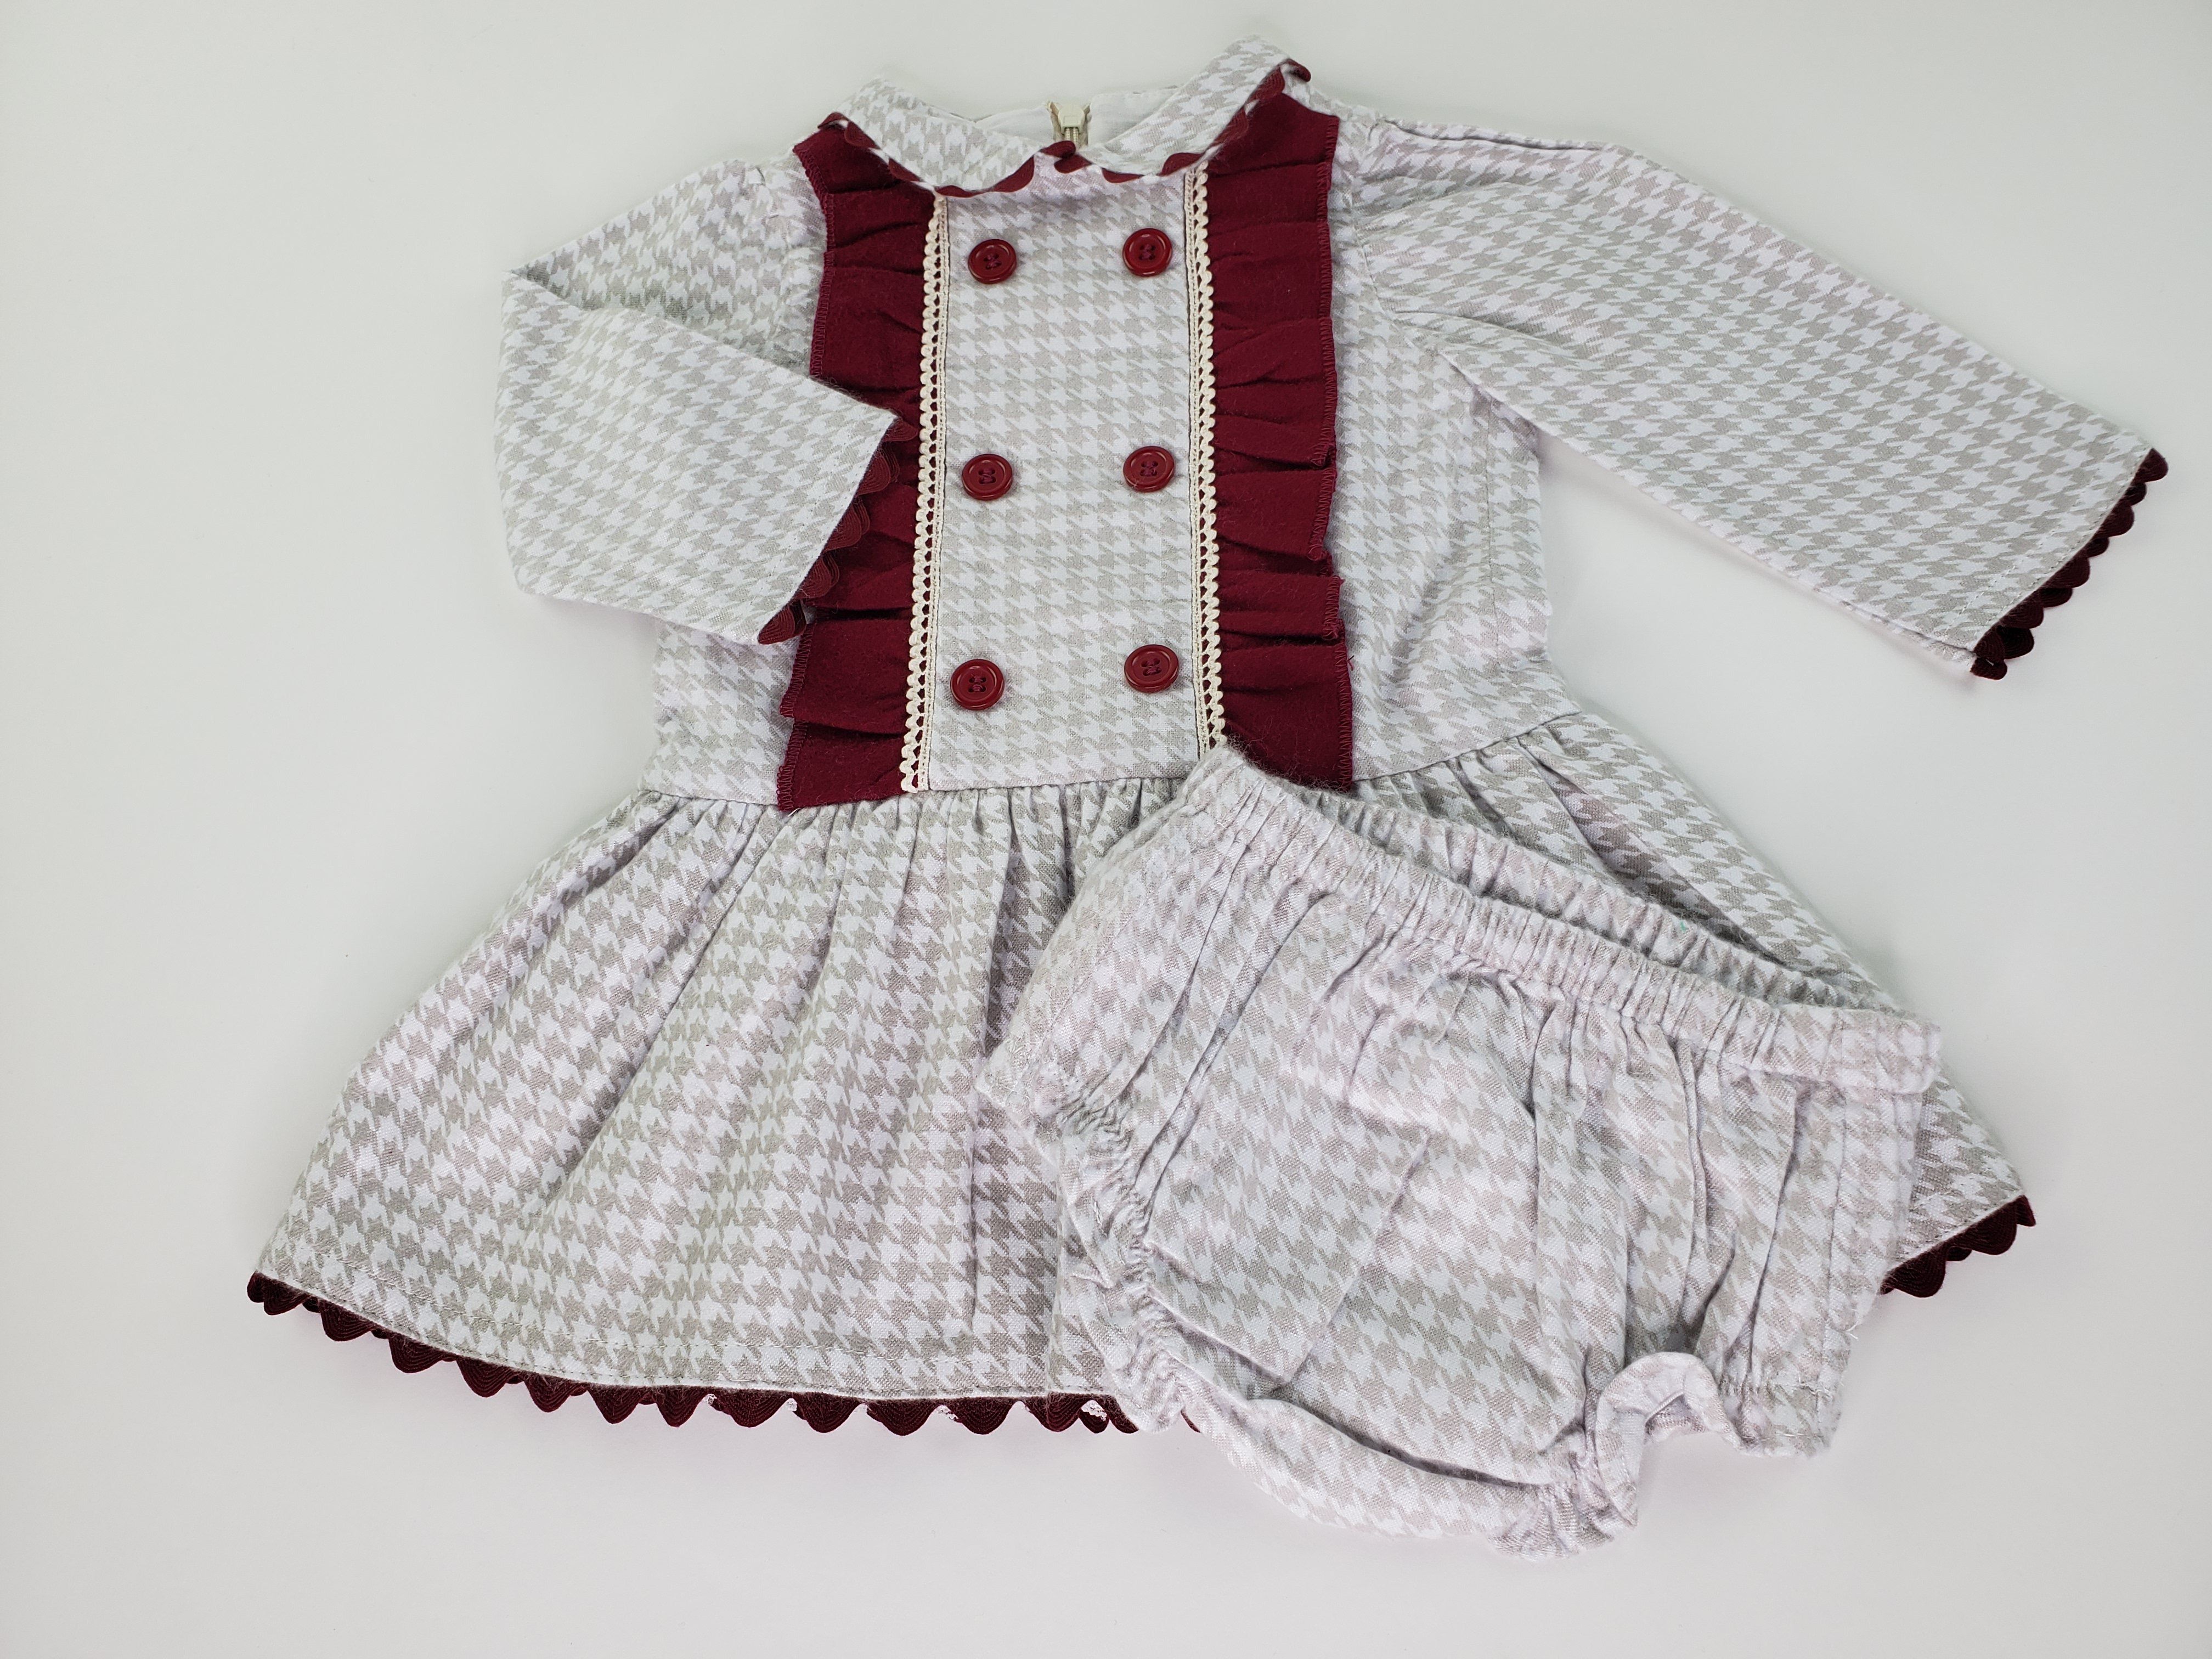 Taupe Ivory Houndstooth Dress-Toddler Girl Dress Dress, Bloomers & Bonnet Alfa Baby Boutique 